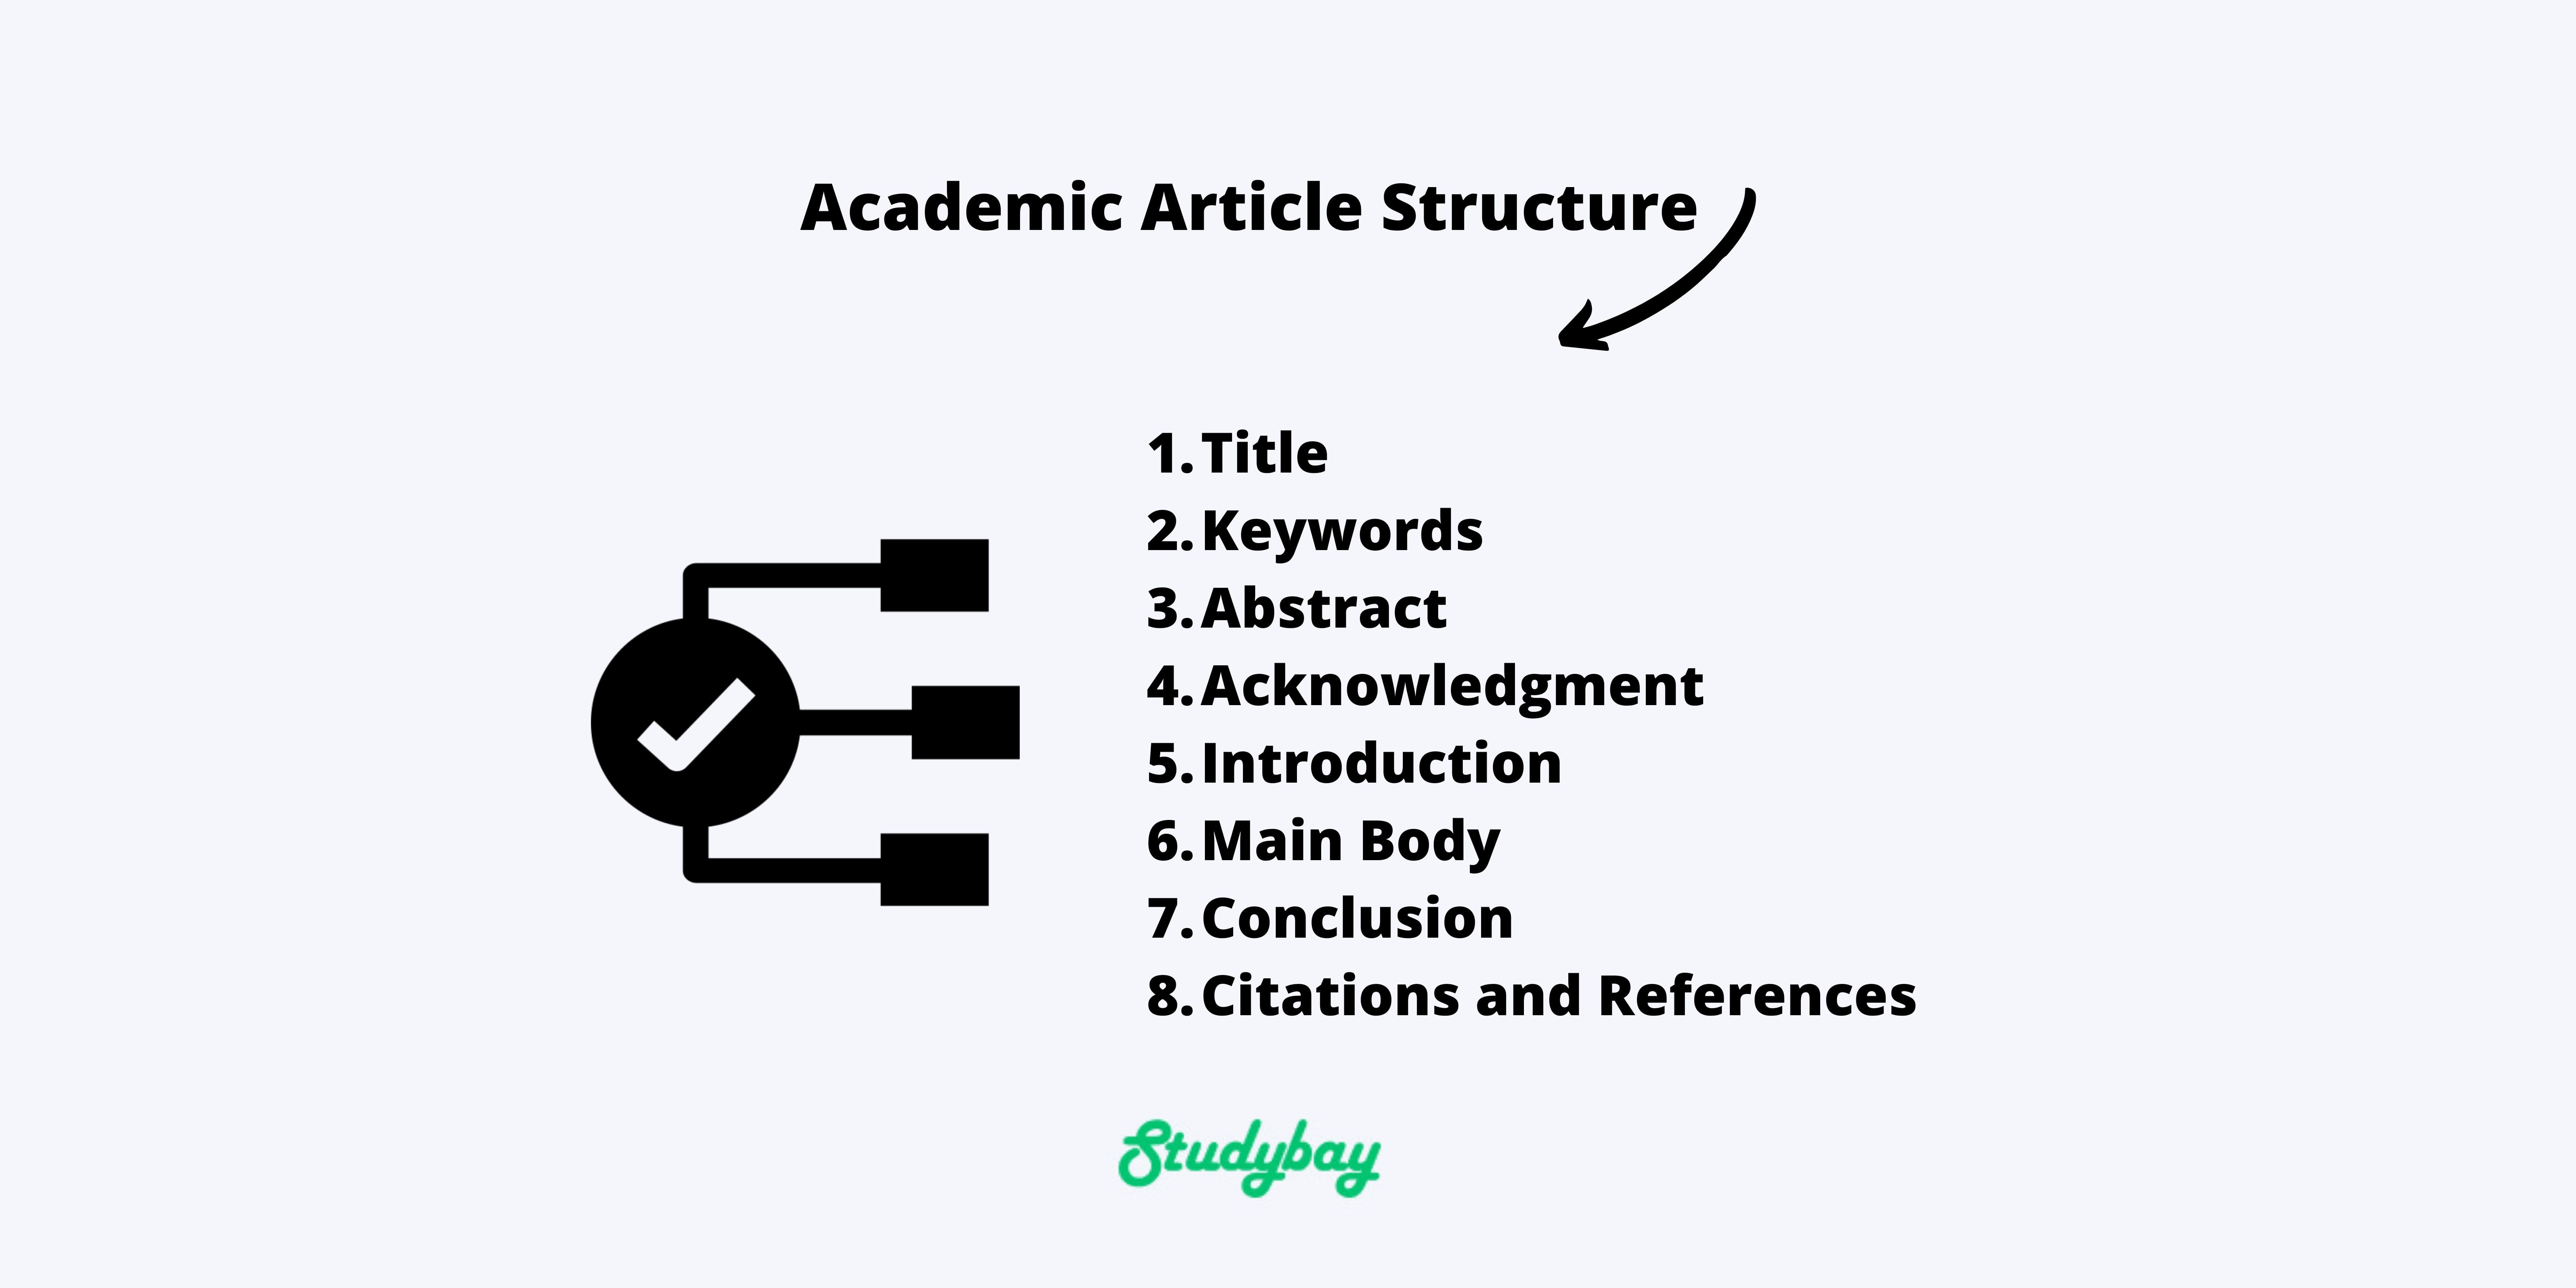 Academic Article Structure